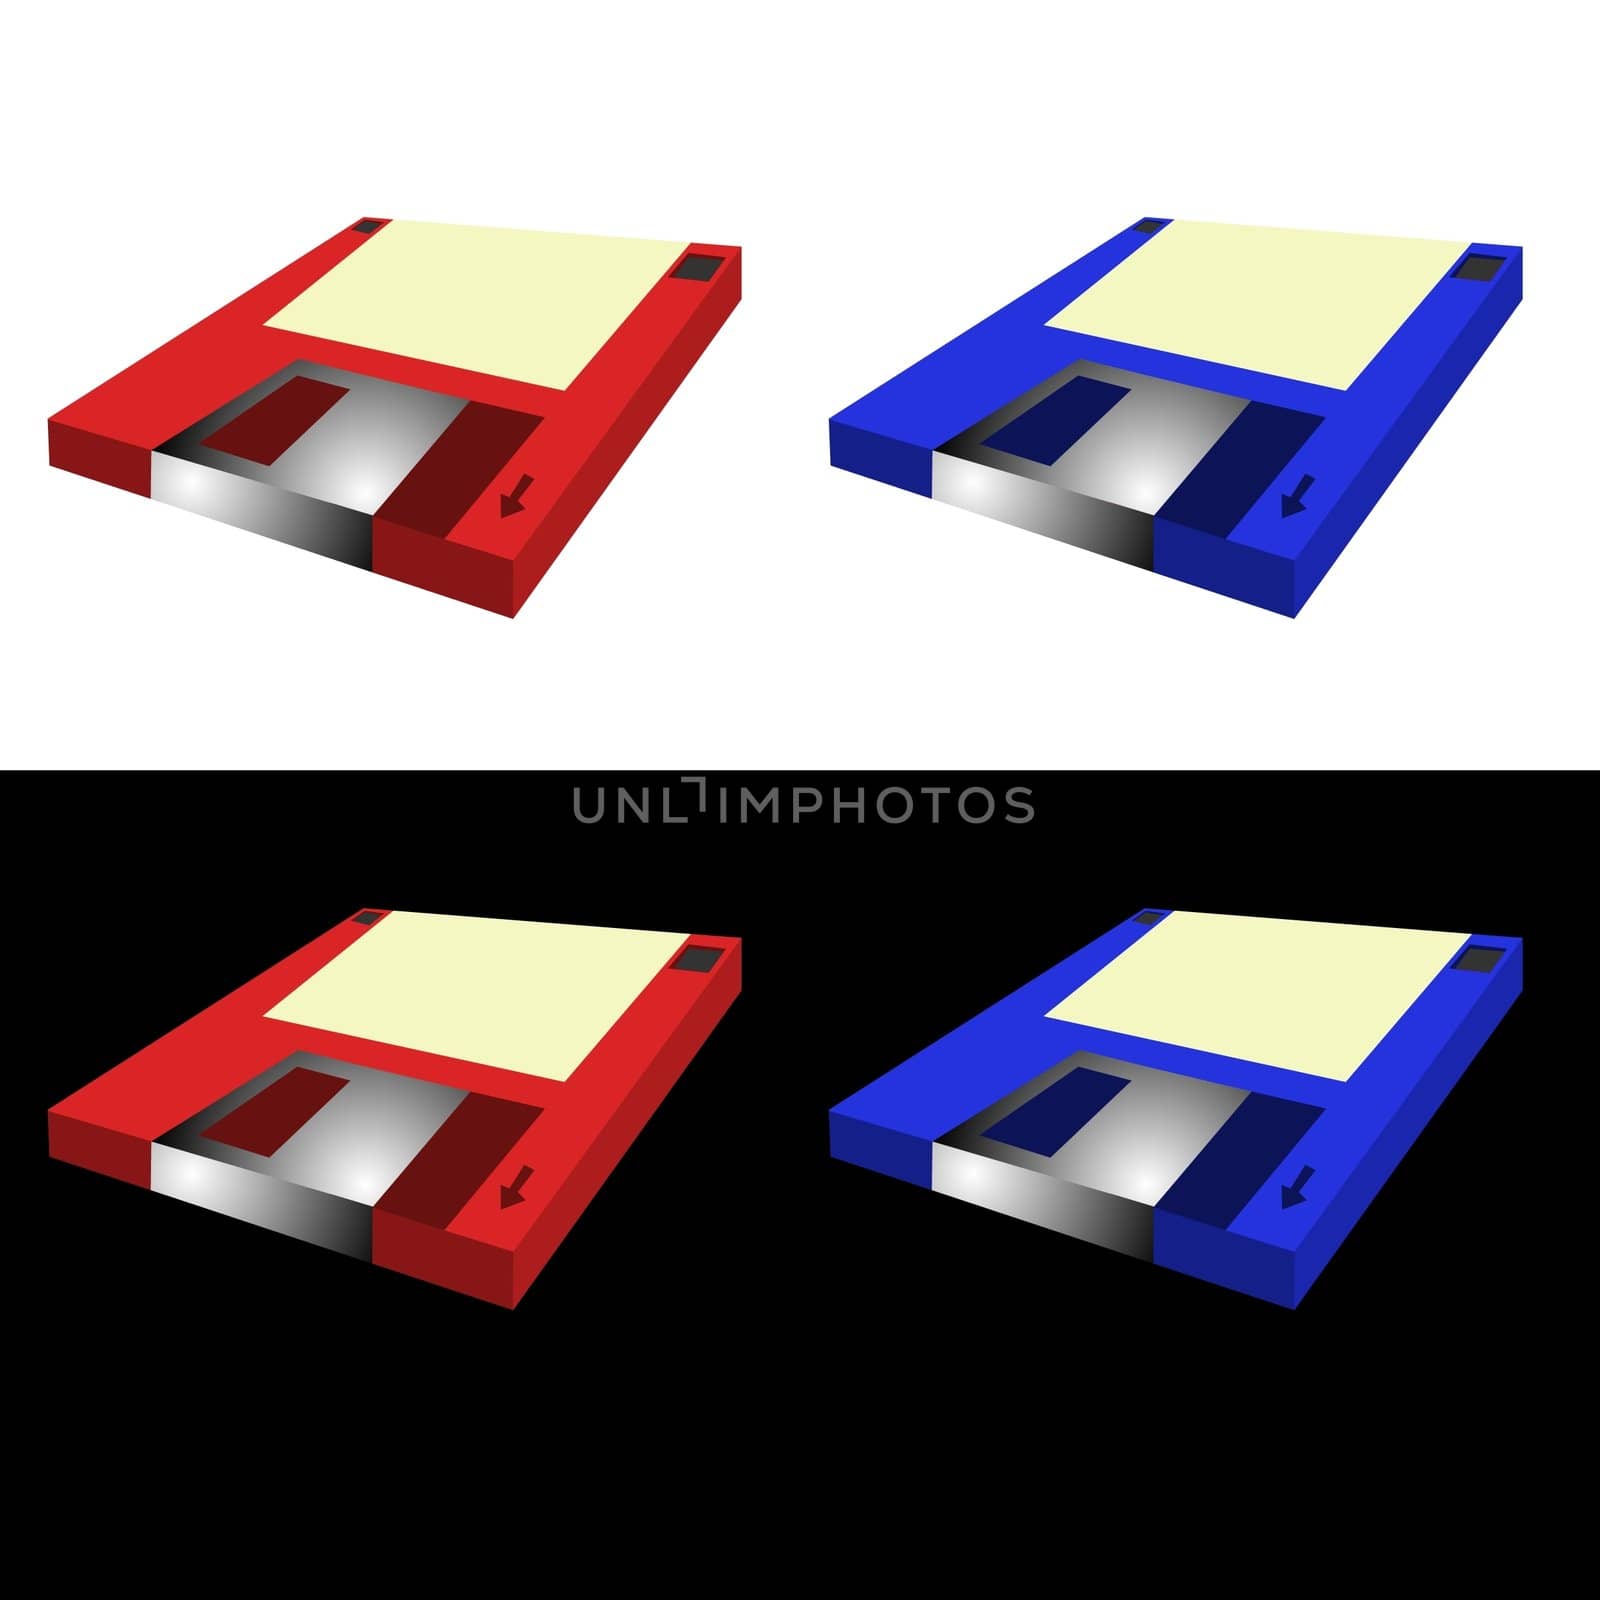 Blue and red (Load/Save) floppy disks on white and black backgrounds